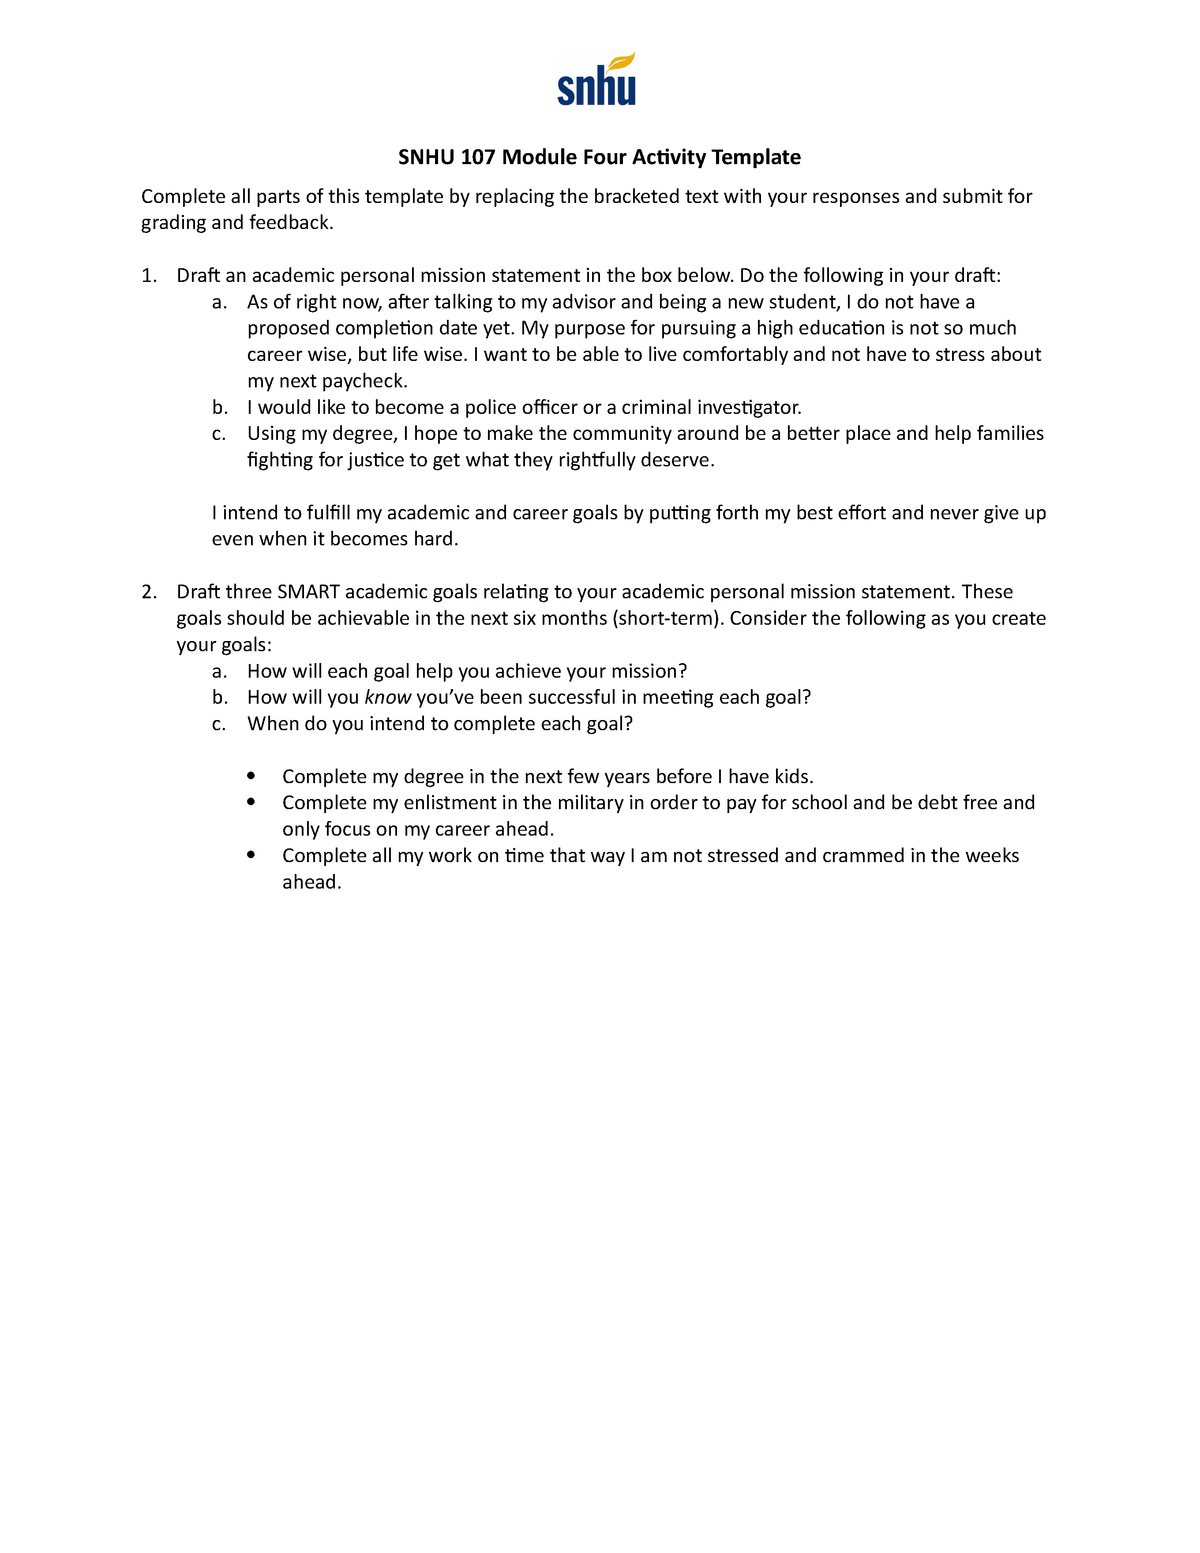 4 2 Activity Mission Statement and Goals SNHU 107 Module Four